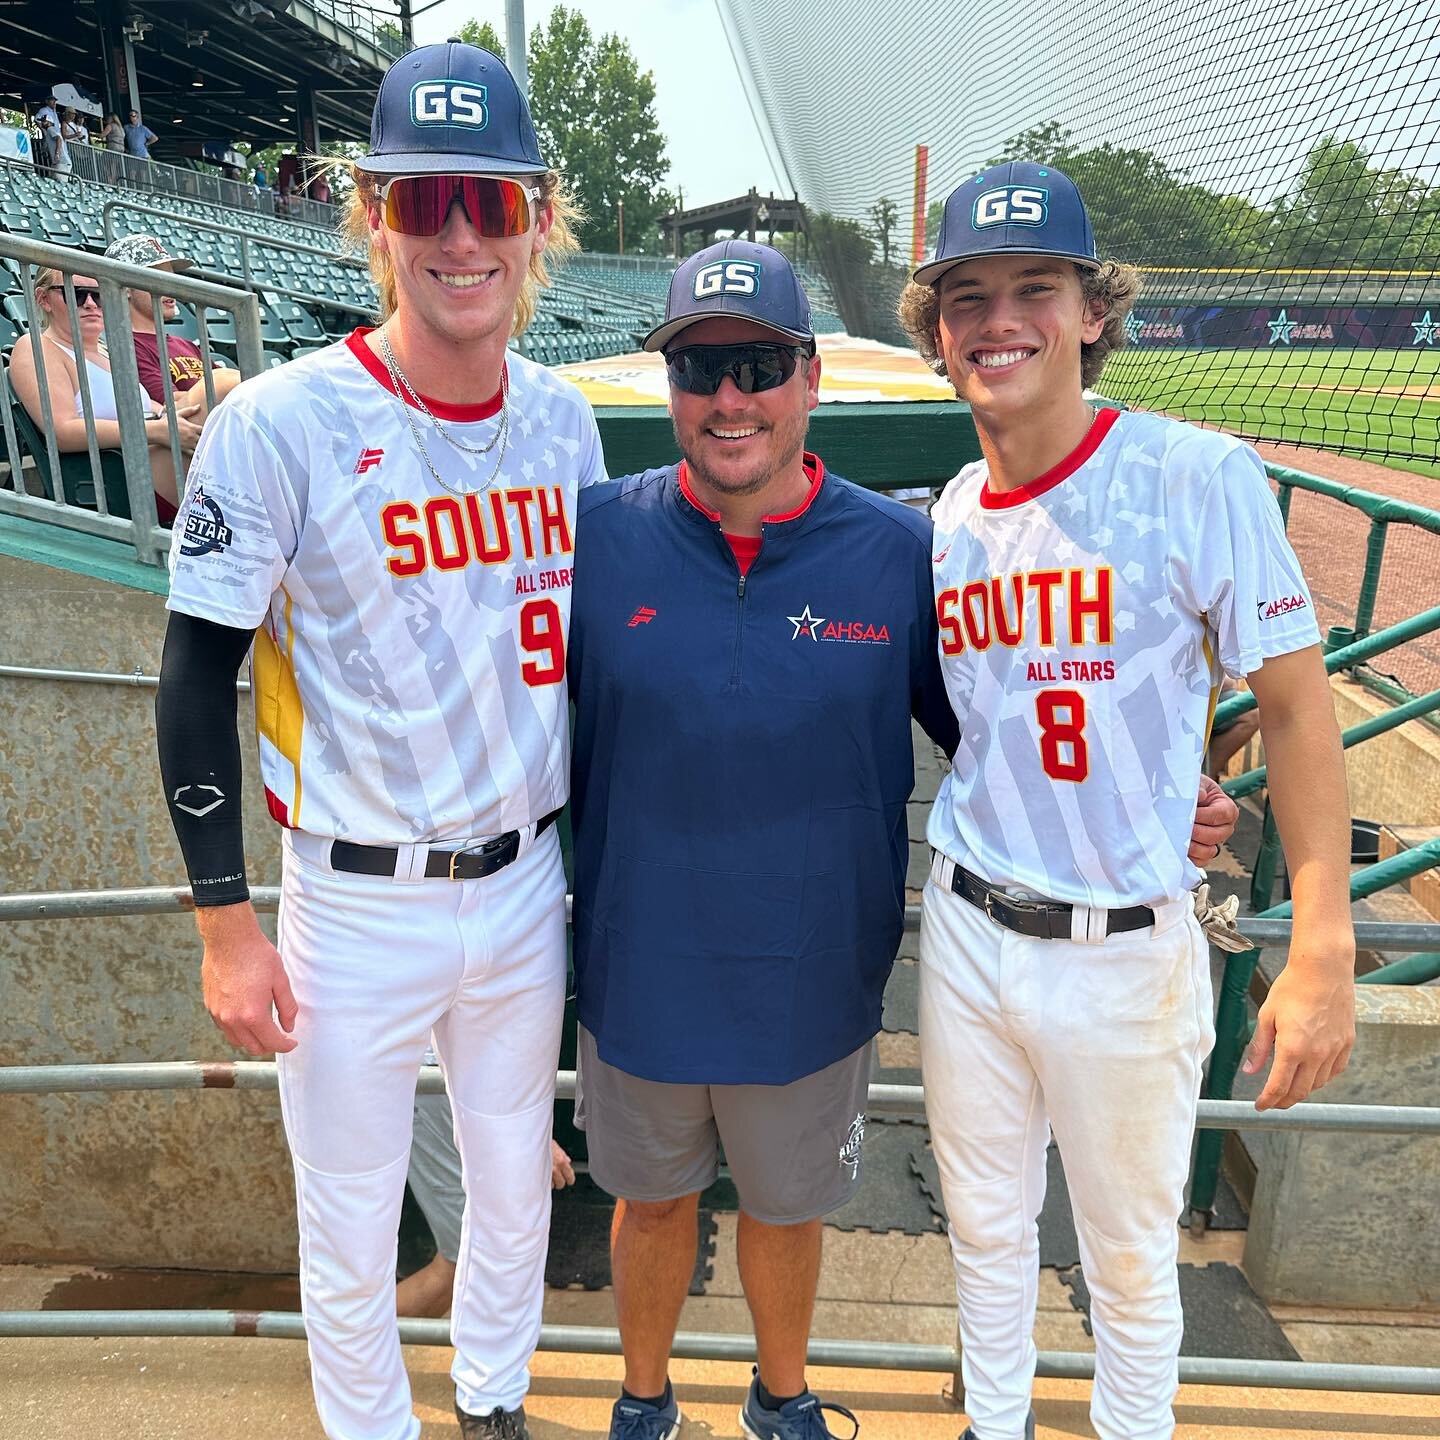 The Gulf Shores baseball program was represented by Mac Anderson, head coach Chris Jacks and Connor Gehr at the annual AHSAA North-South All-Star contest on Monday, July 17, at Riverwalk Stadium. Anderson threw four strikeouts in two innings pitched and Gehr provided an RBI hit that helped secure a tie in Game 2.